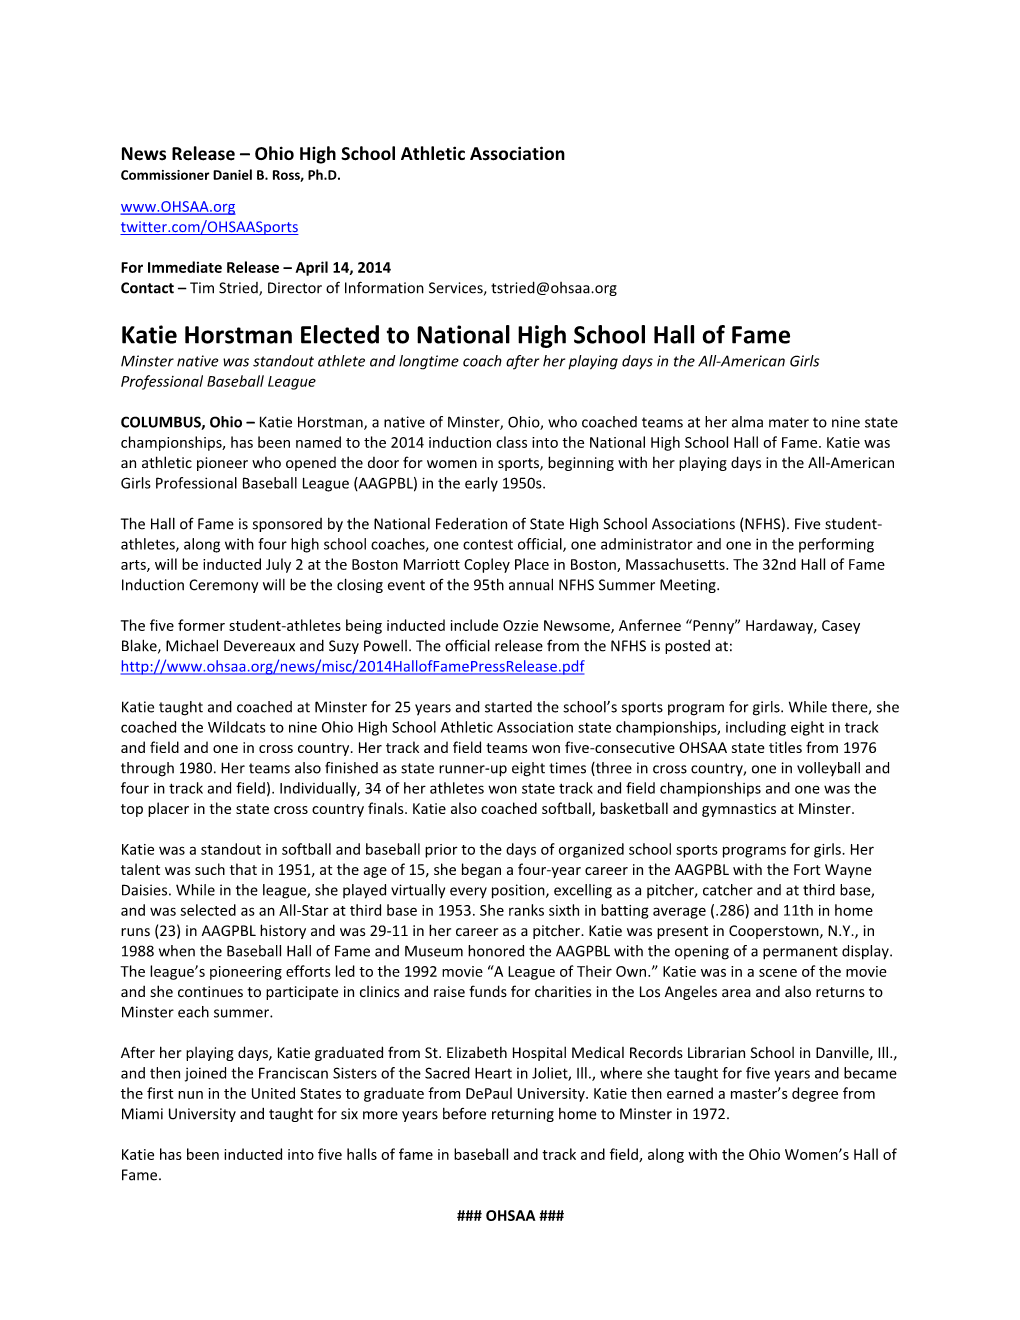 Katie Horstman Elected to National High School Hall of Fame